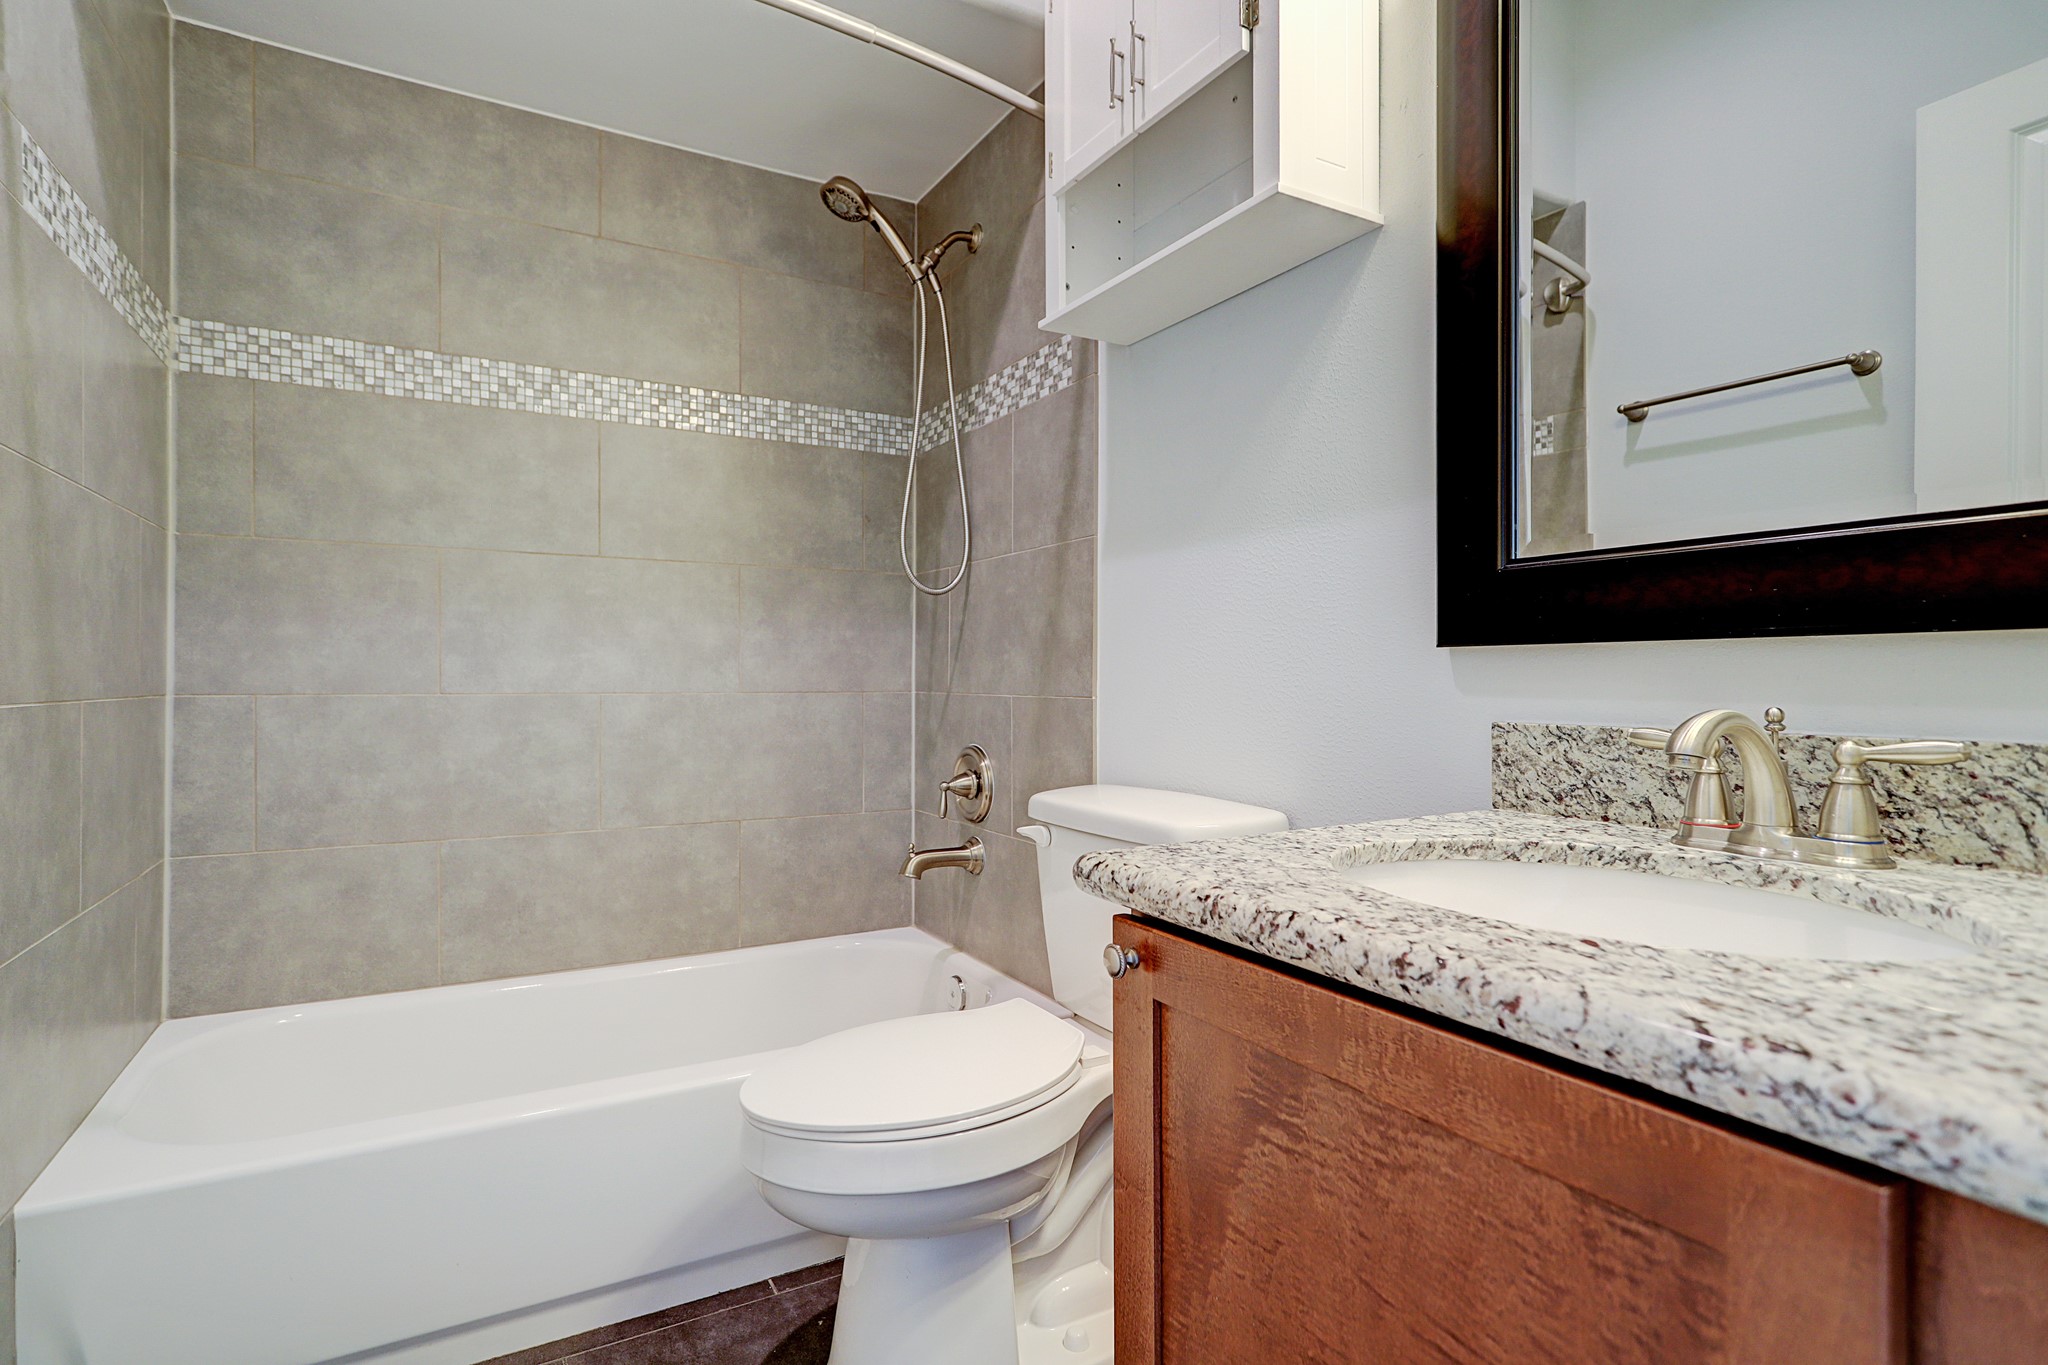 The first floor bath has granite counters with chrome plumbing fixtures.